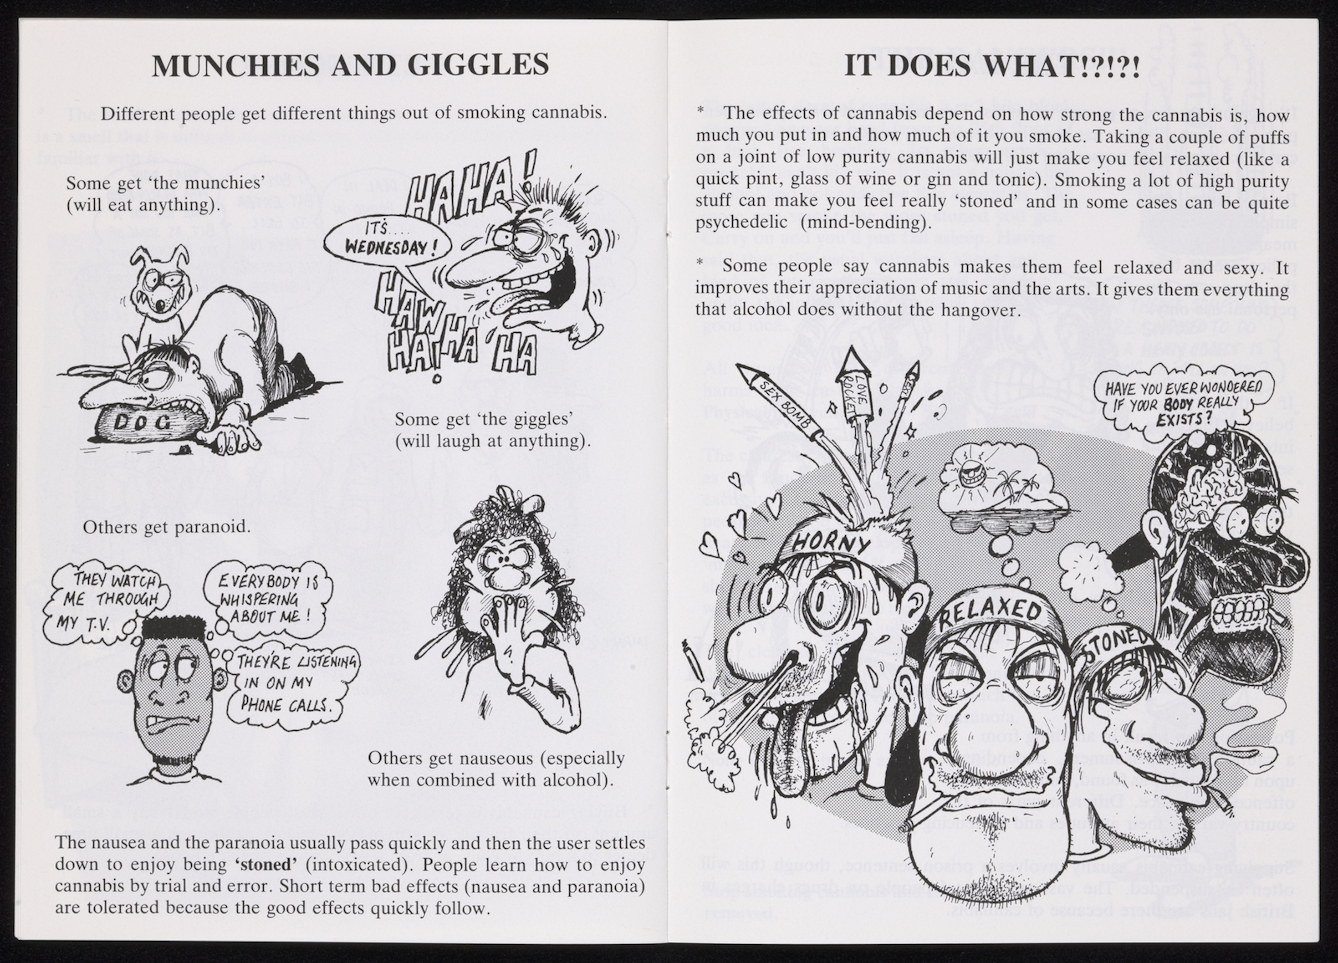 Black and white pages from inside the guide, with text and cartoon-style pictures.